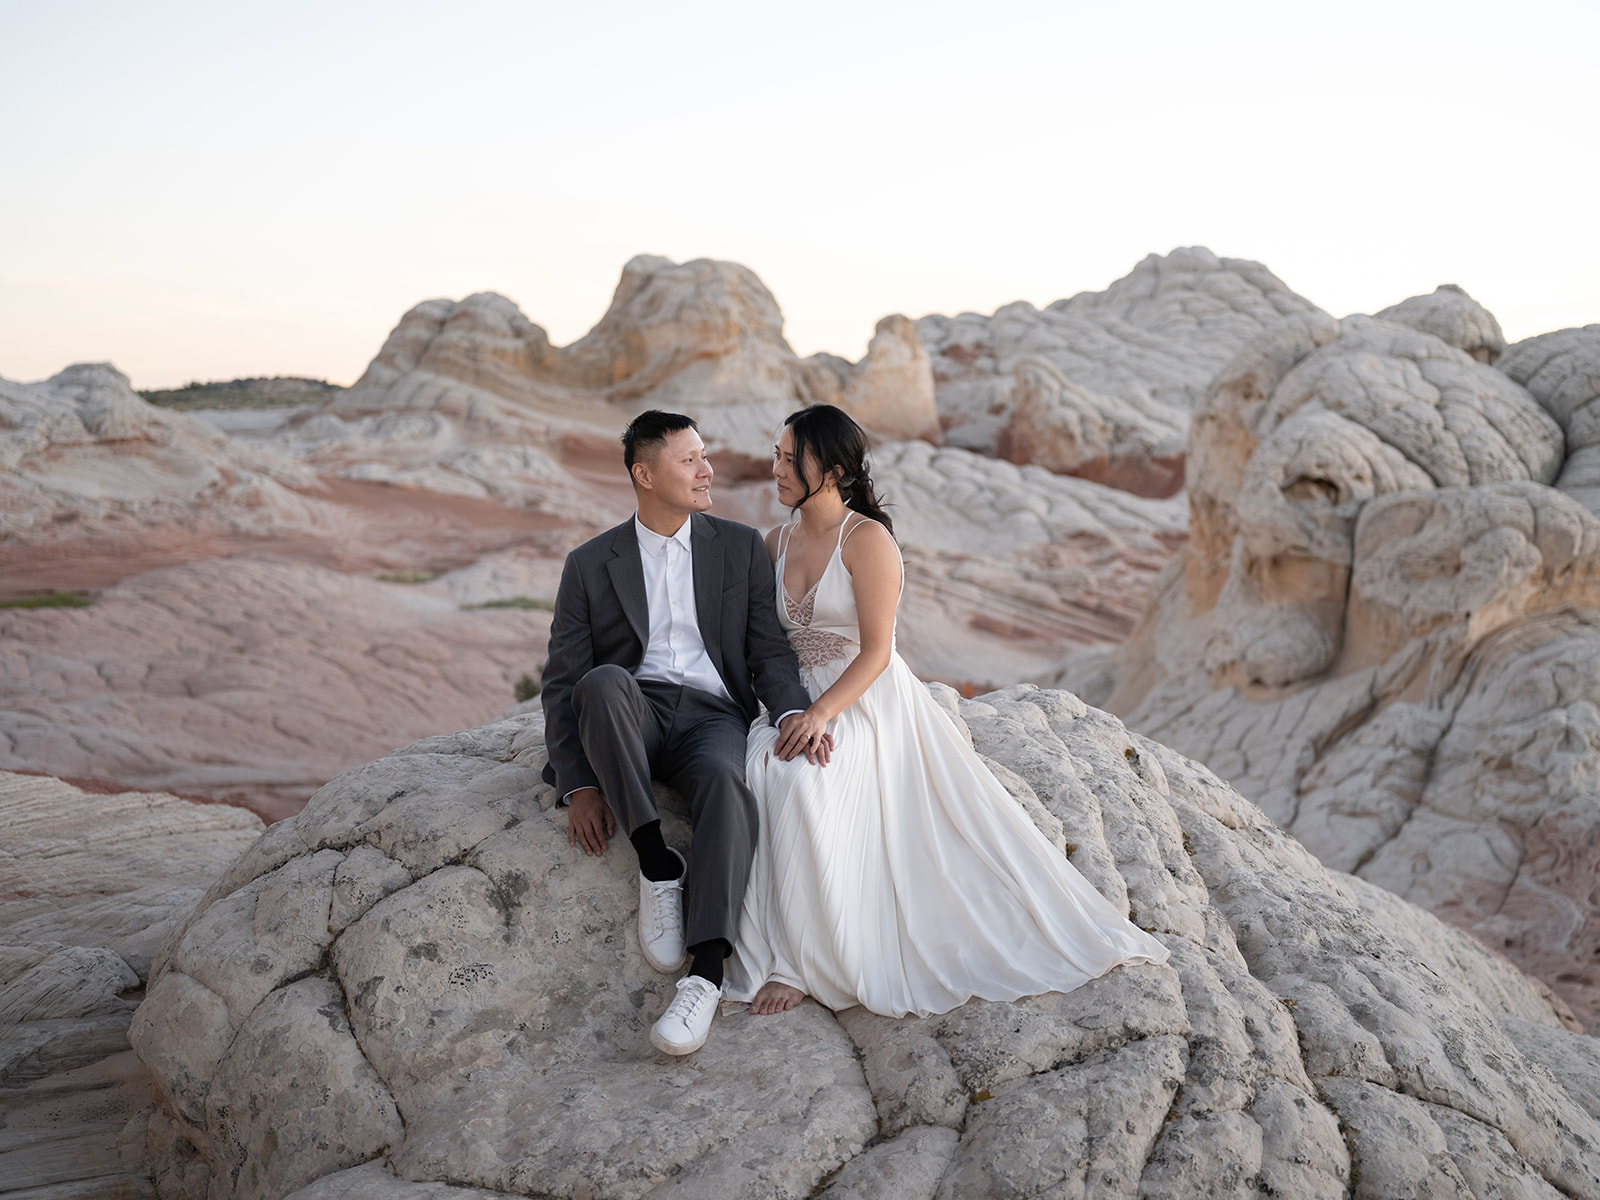 Couple setting on sandstone formations during golden hour in White Pocket, Arizona 